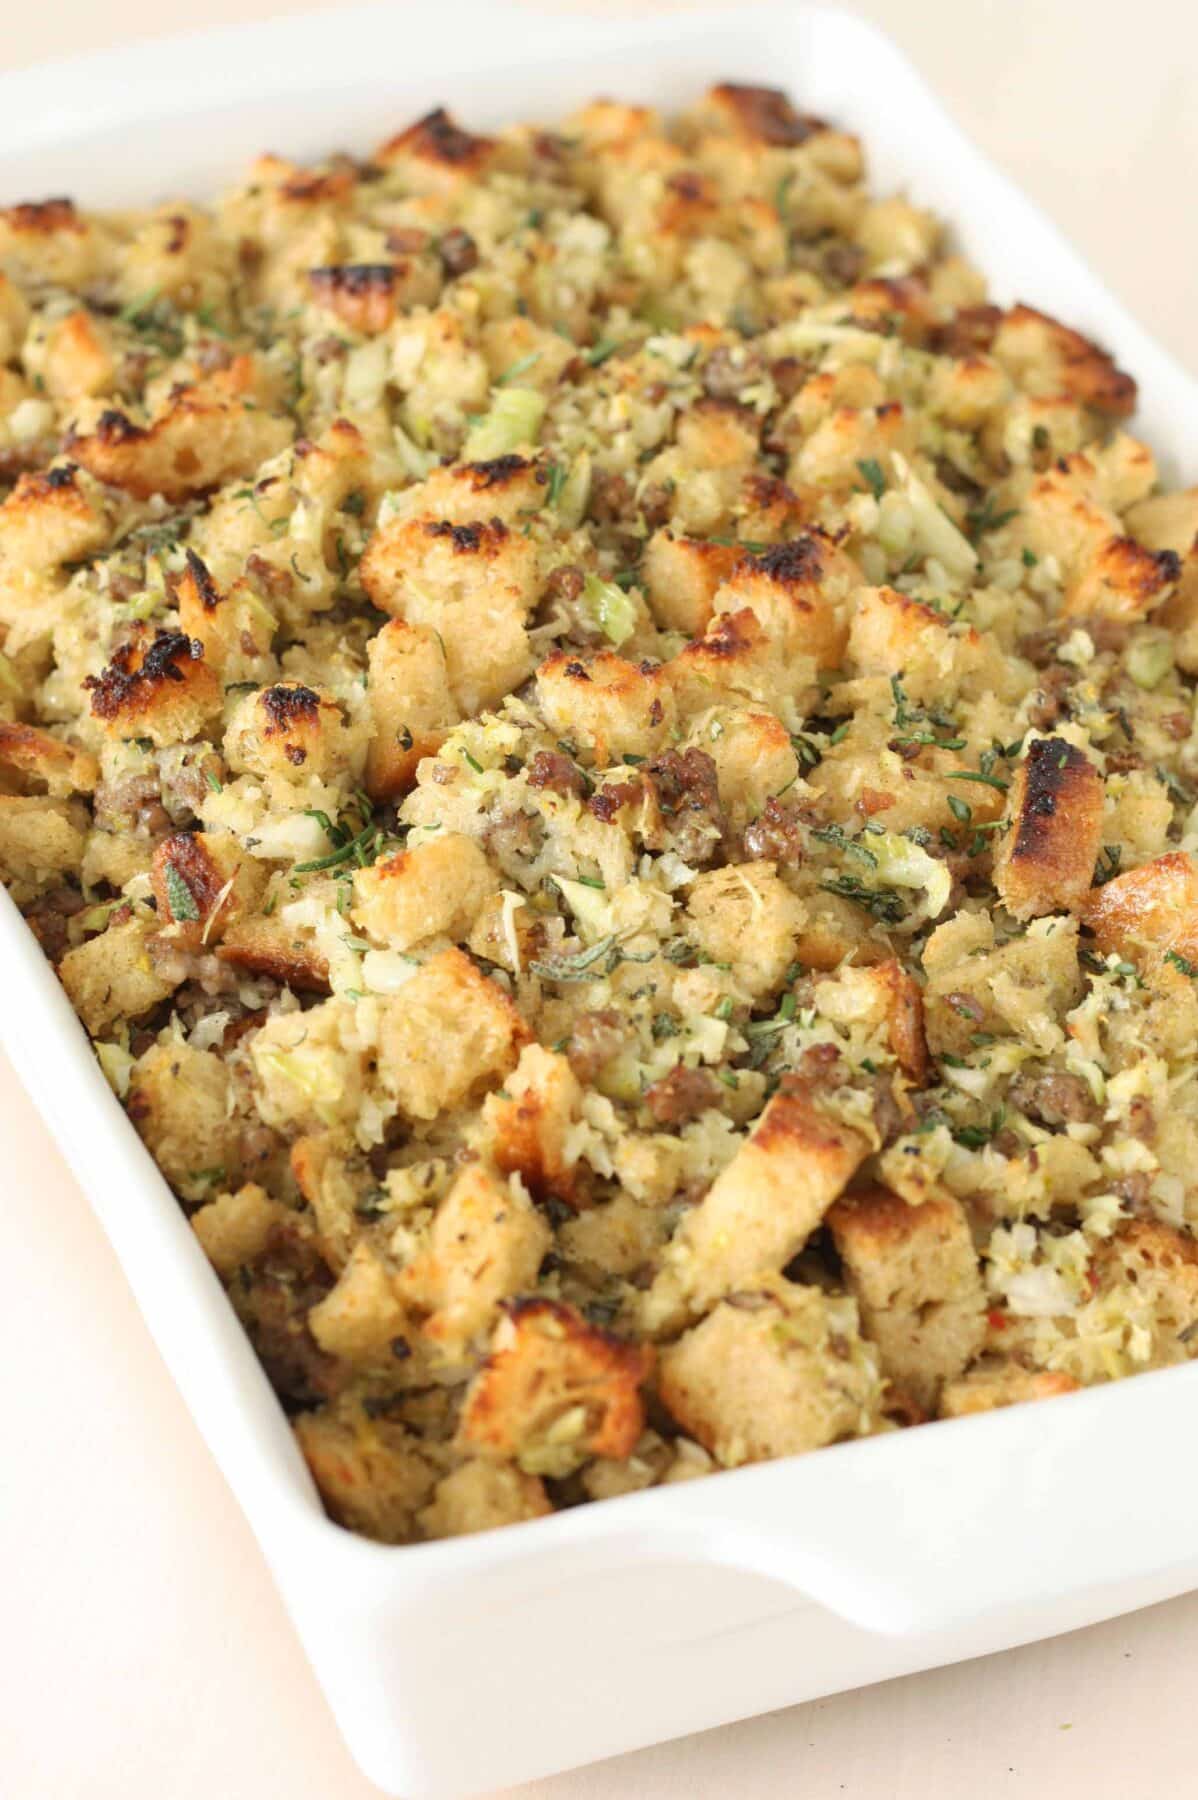 baked stuffing in a casserole dish